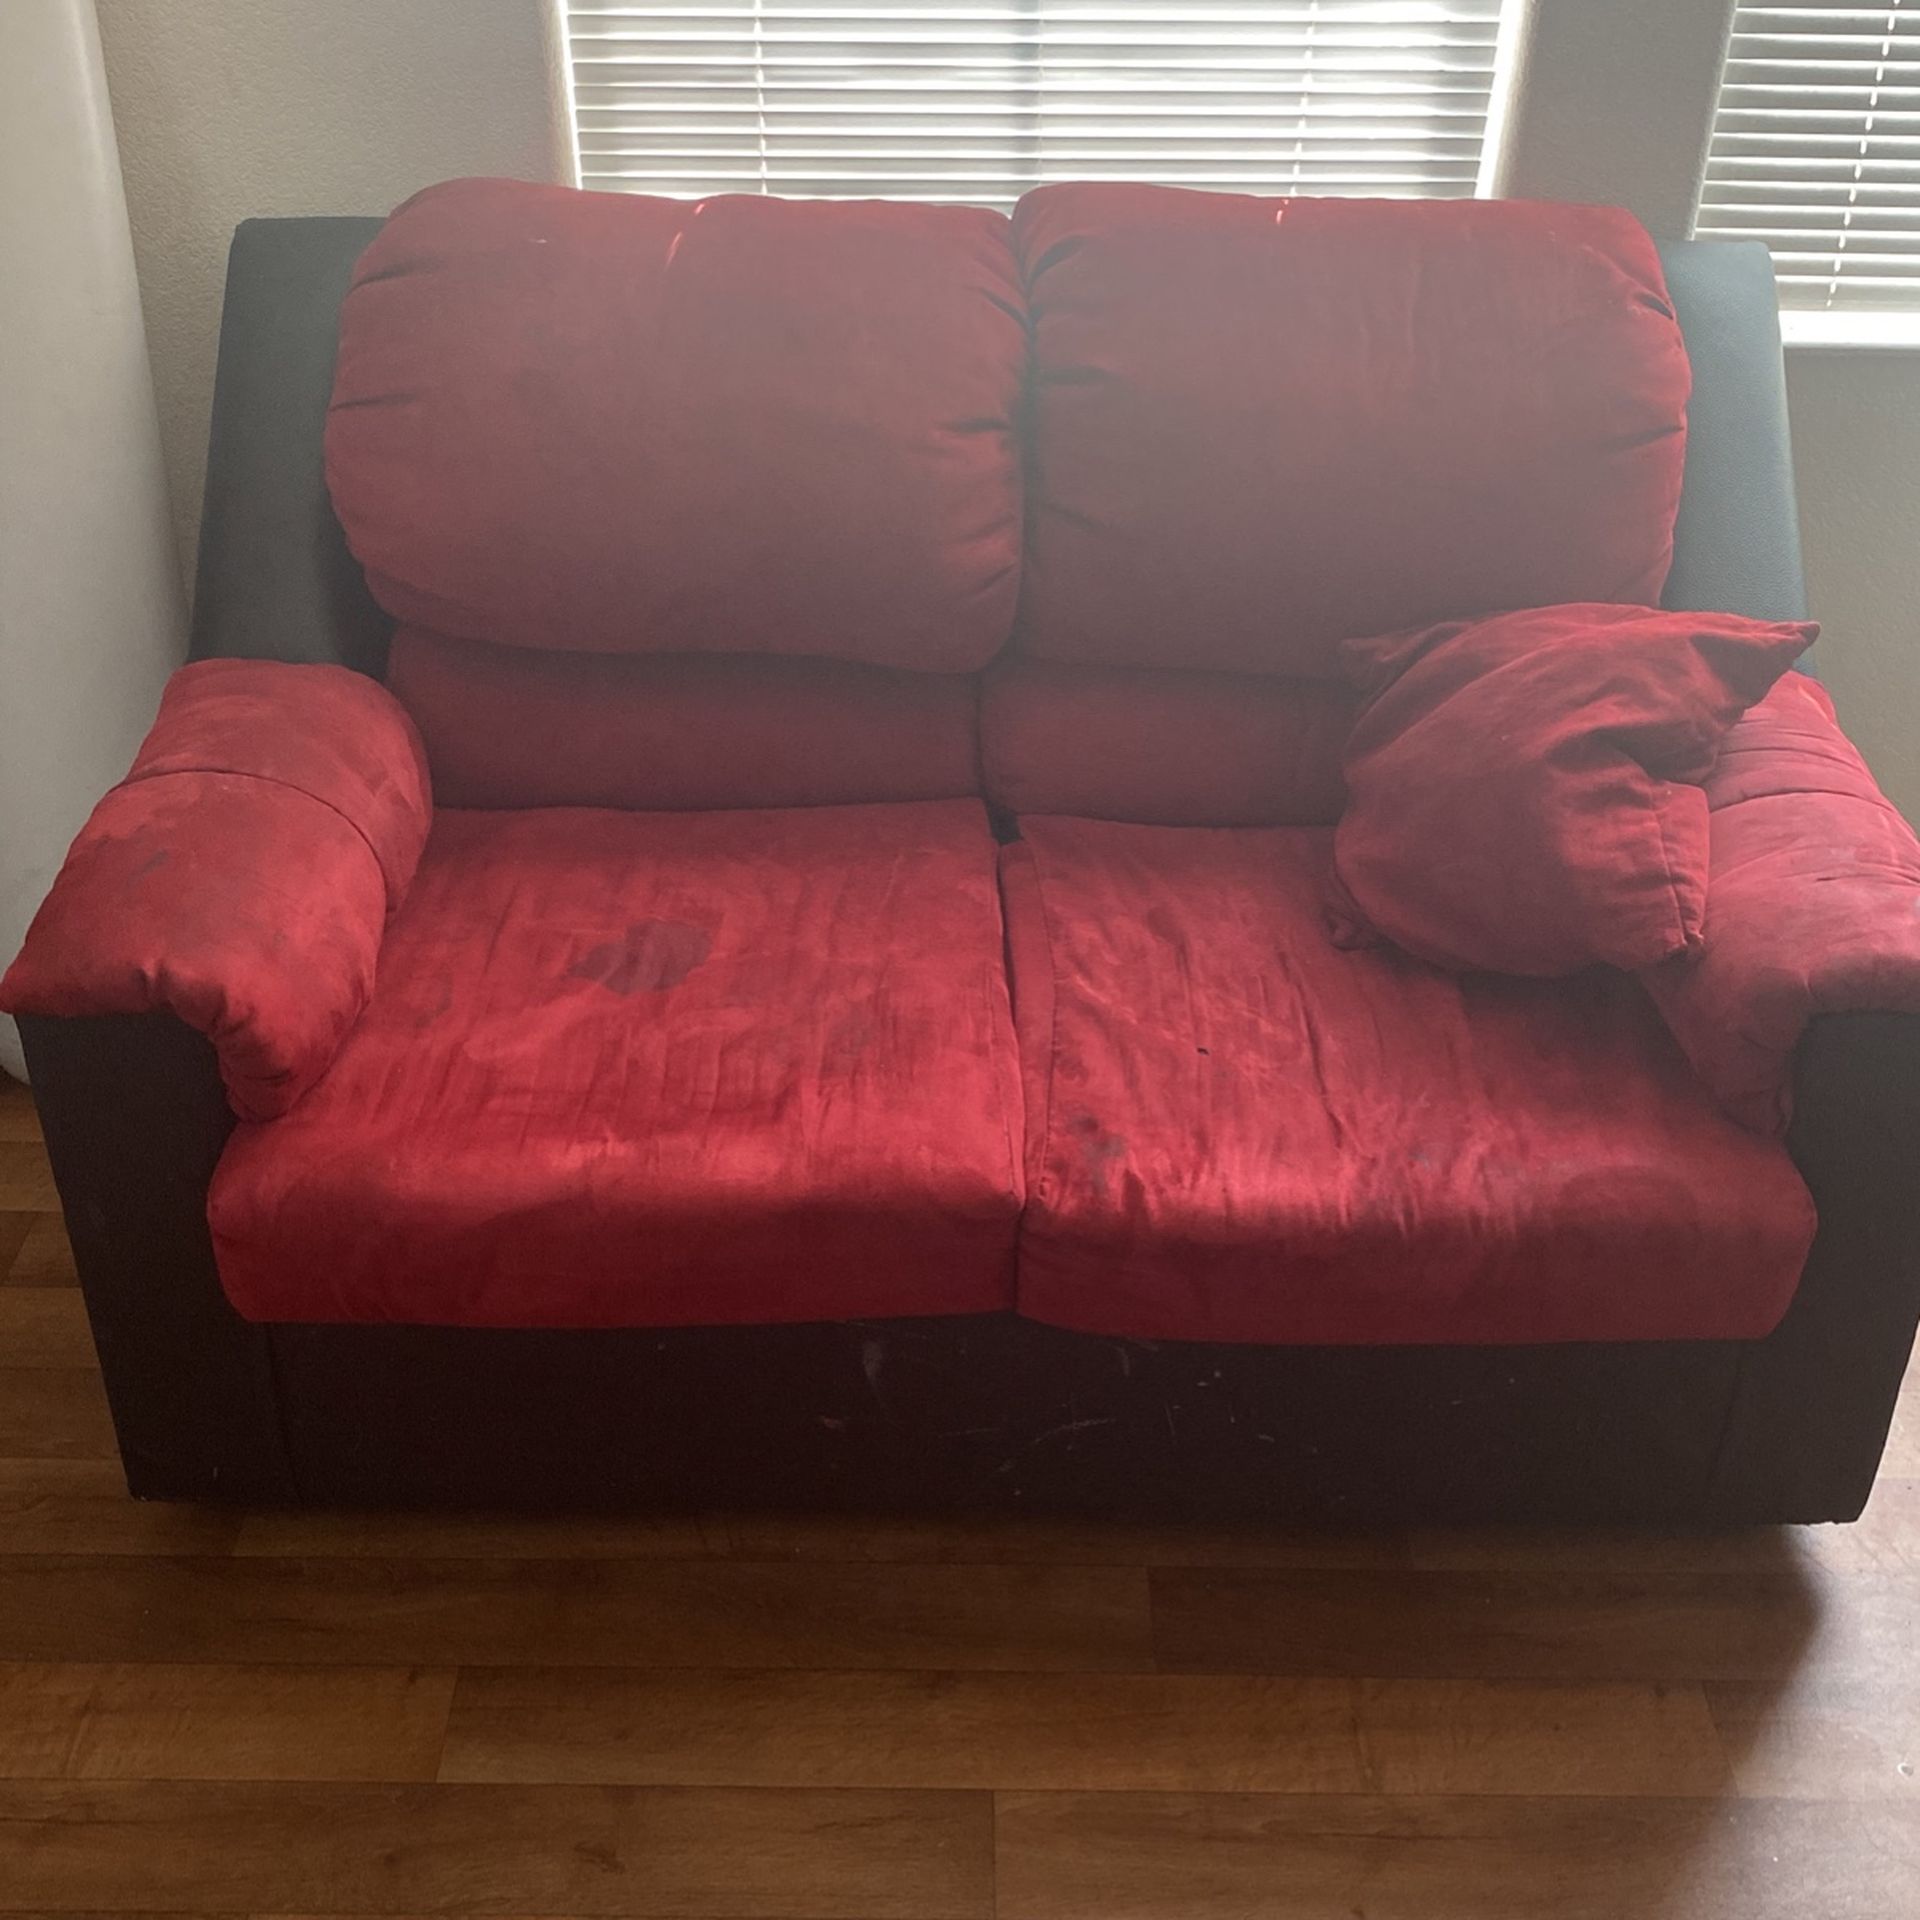 Used Couch And  Love Seat. Couch Has A Small Tear On Arm  And Burn Near The Back. Must Go ASAP  $200 OBO 